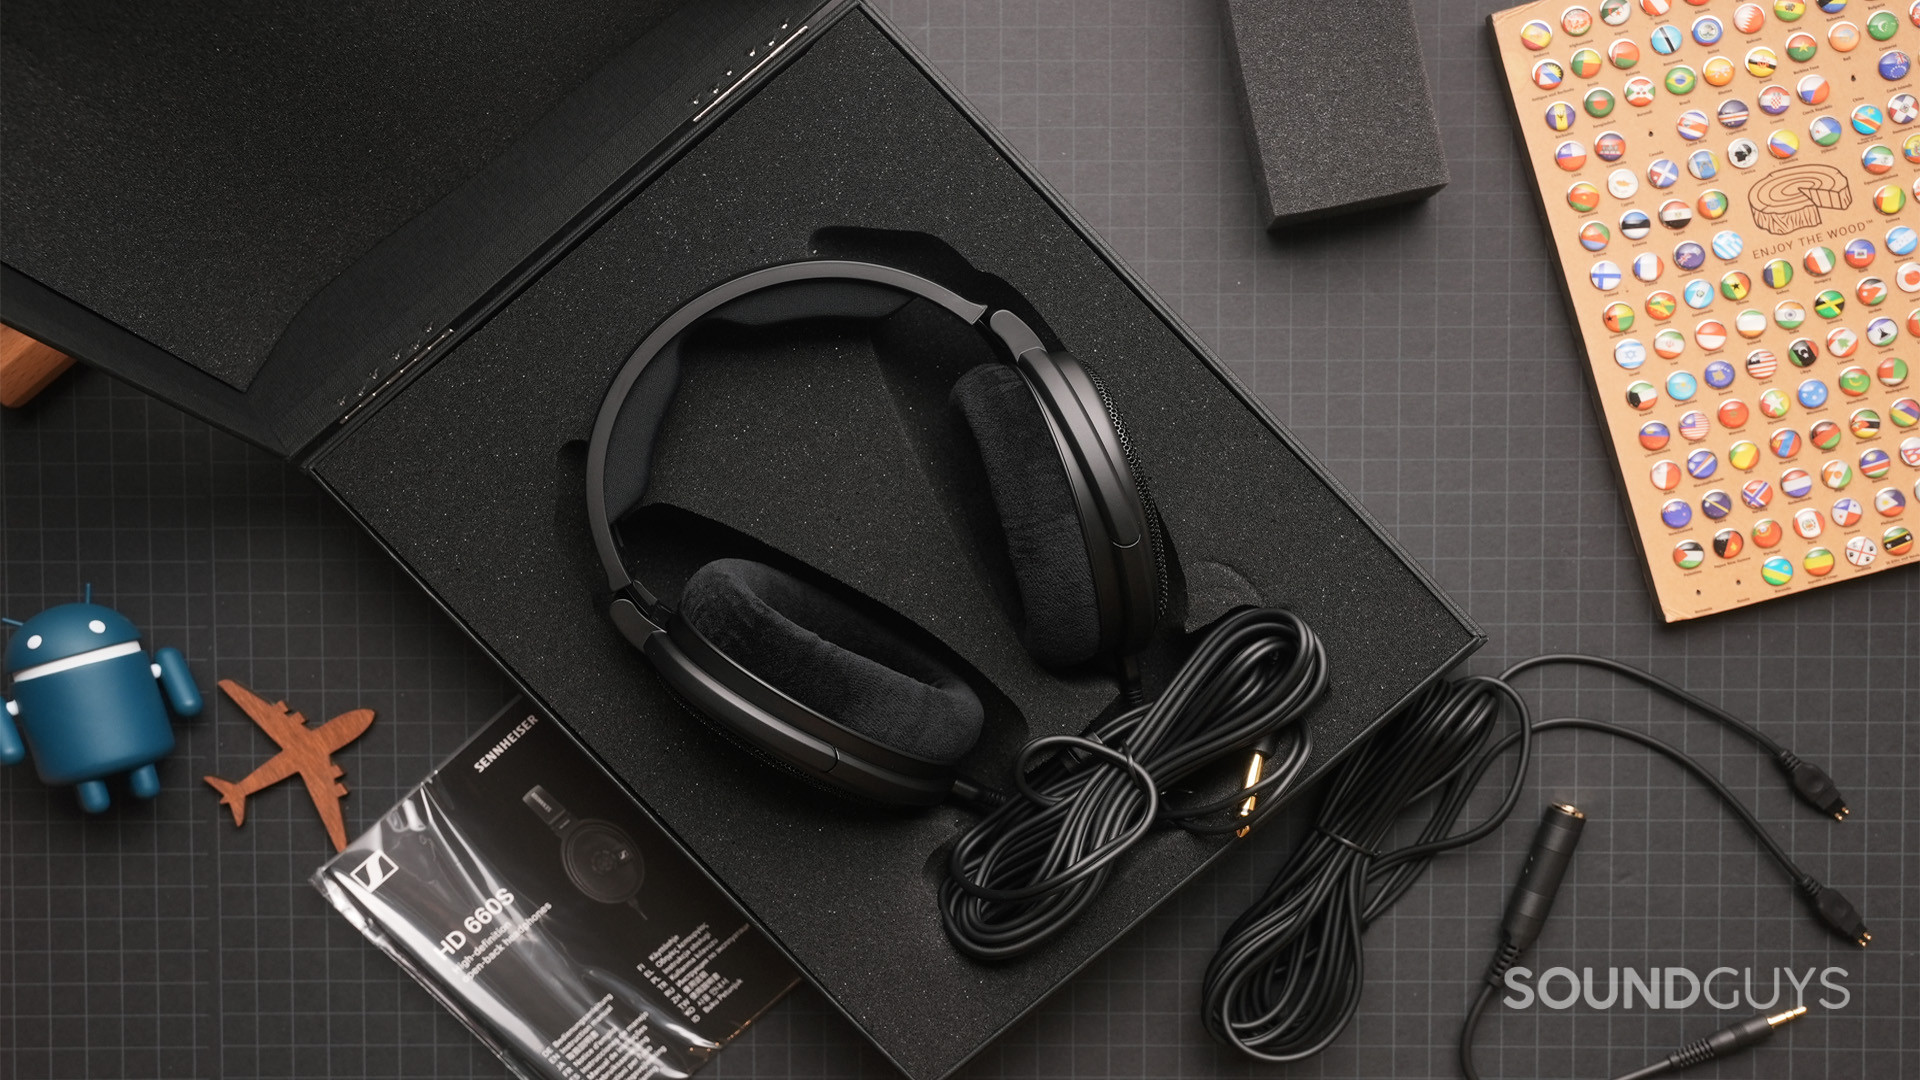 The Sennheiser HD660S shown in included case with accessories.